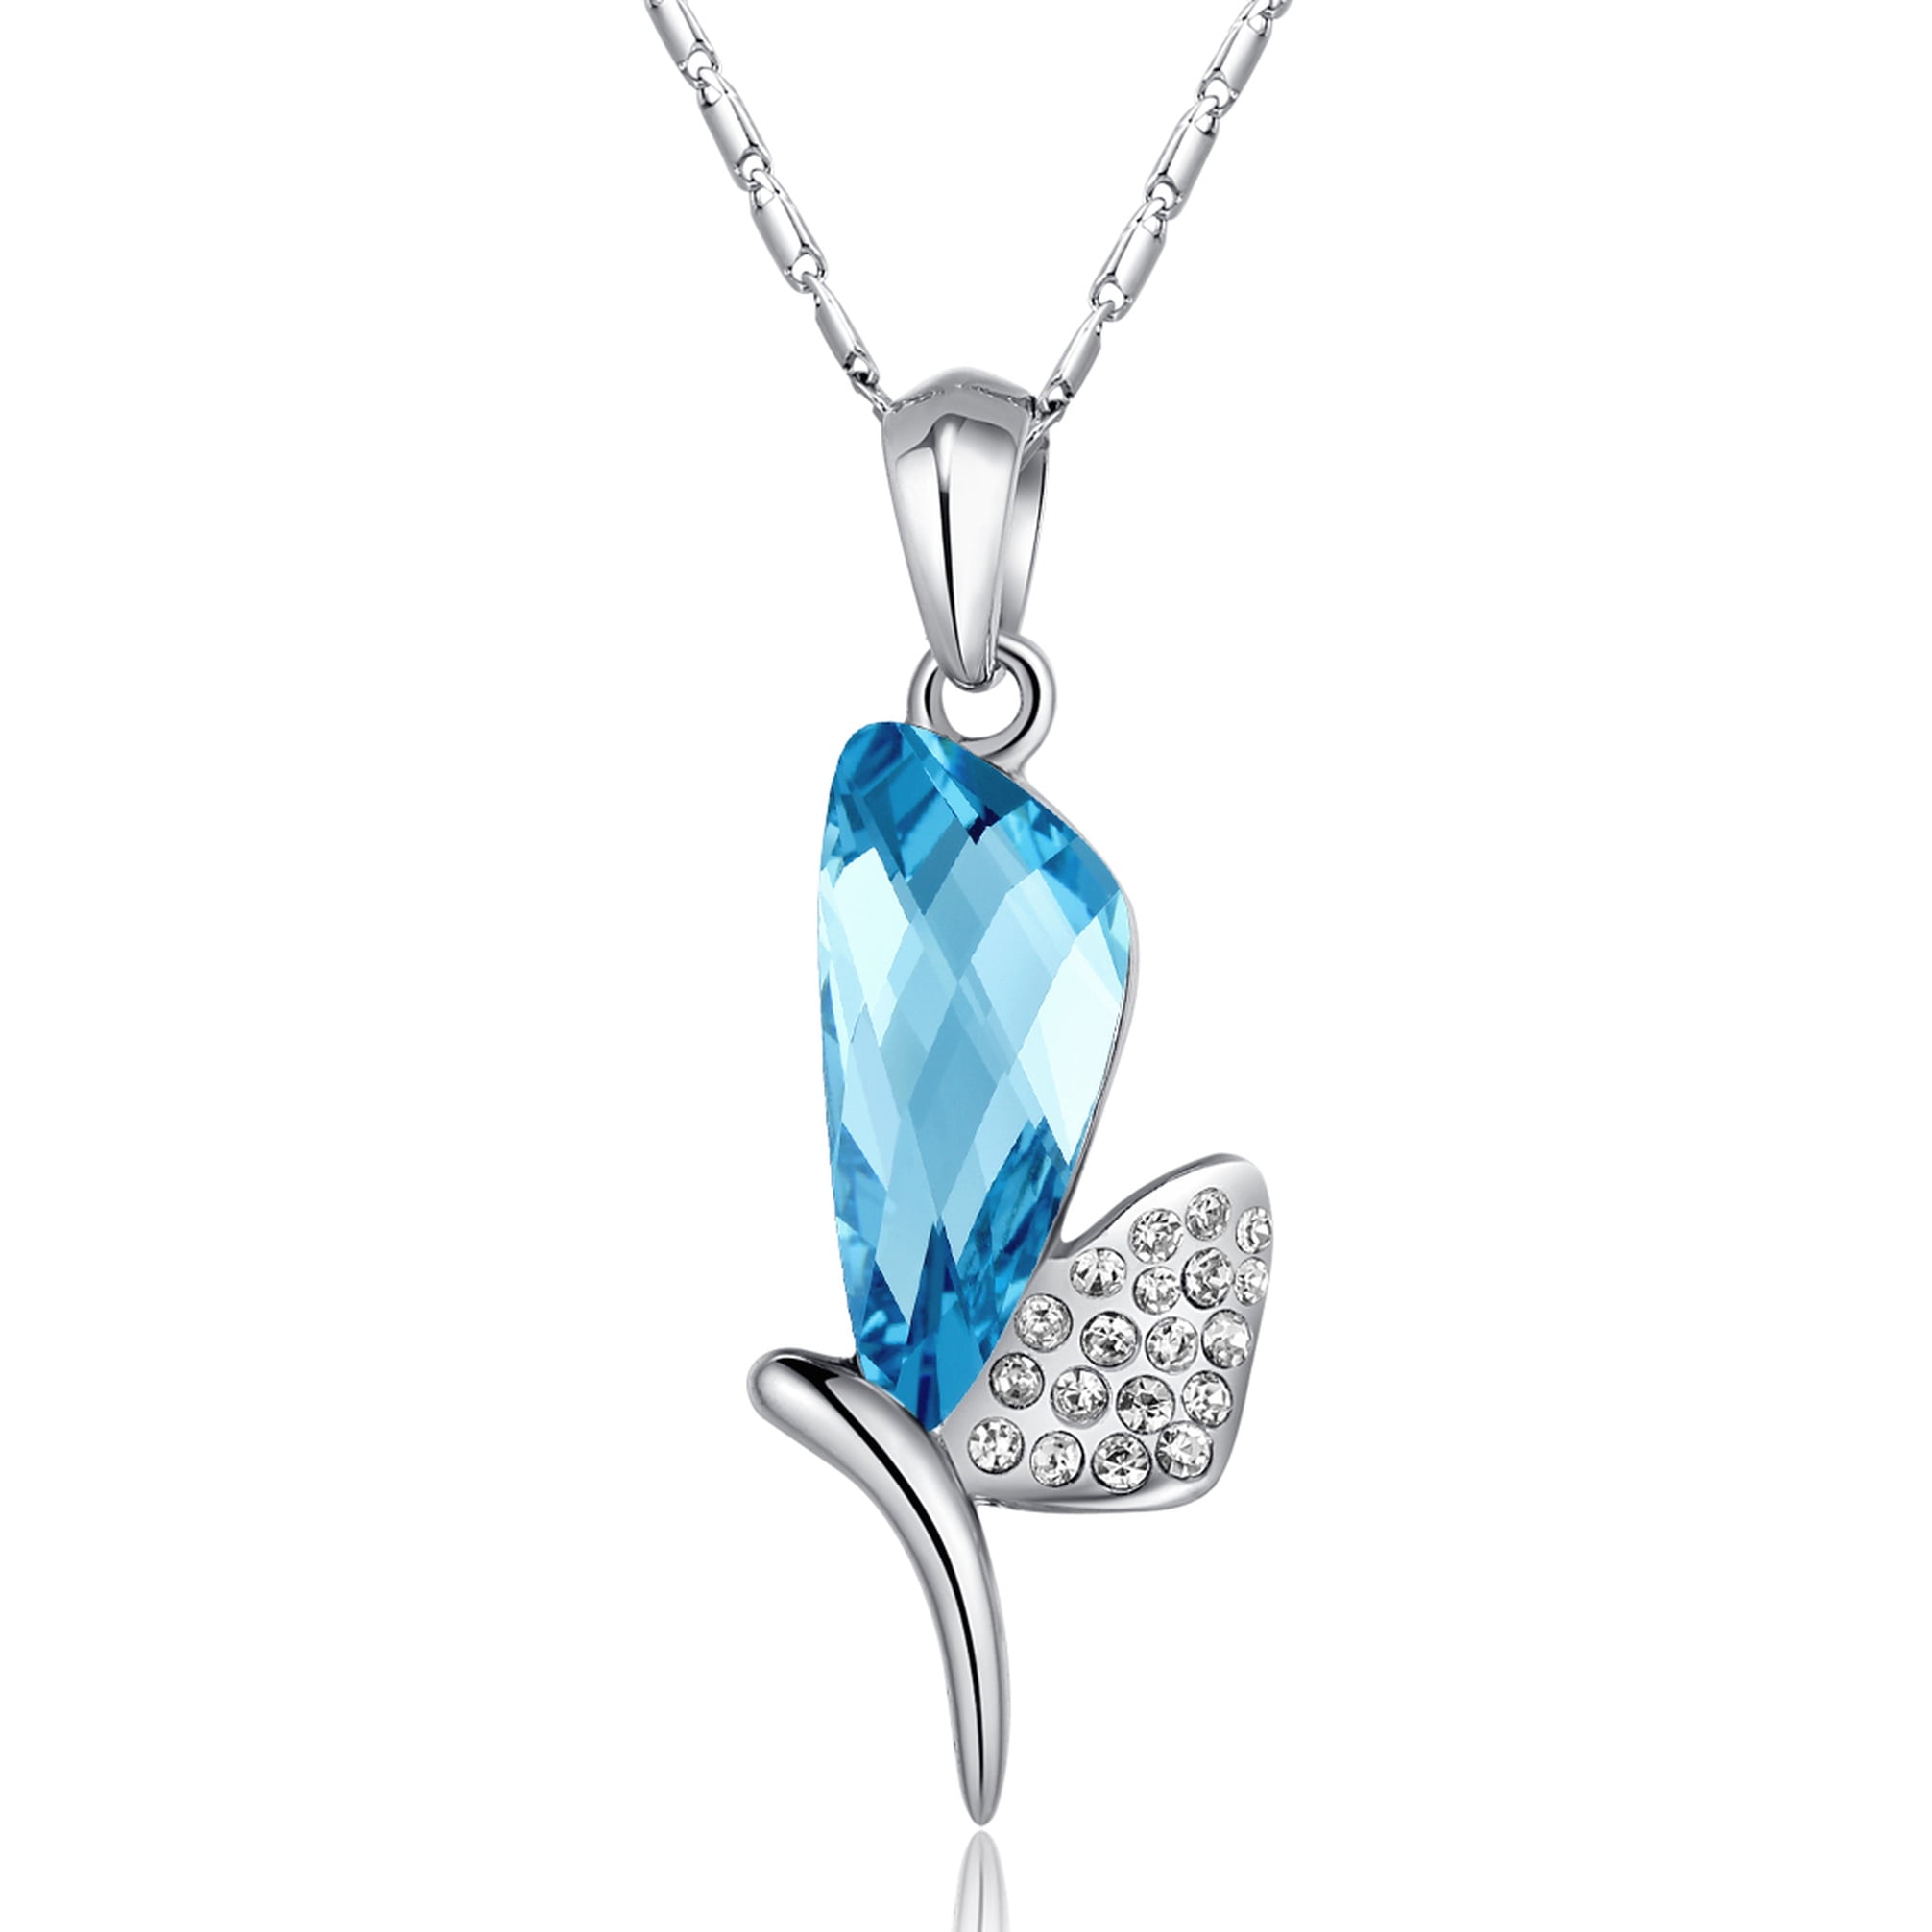 Flat Filigree Butterfly Pendant Necklace with Swarovski Faceted Crystal